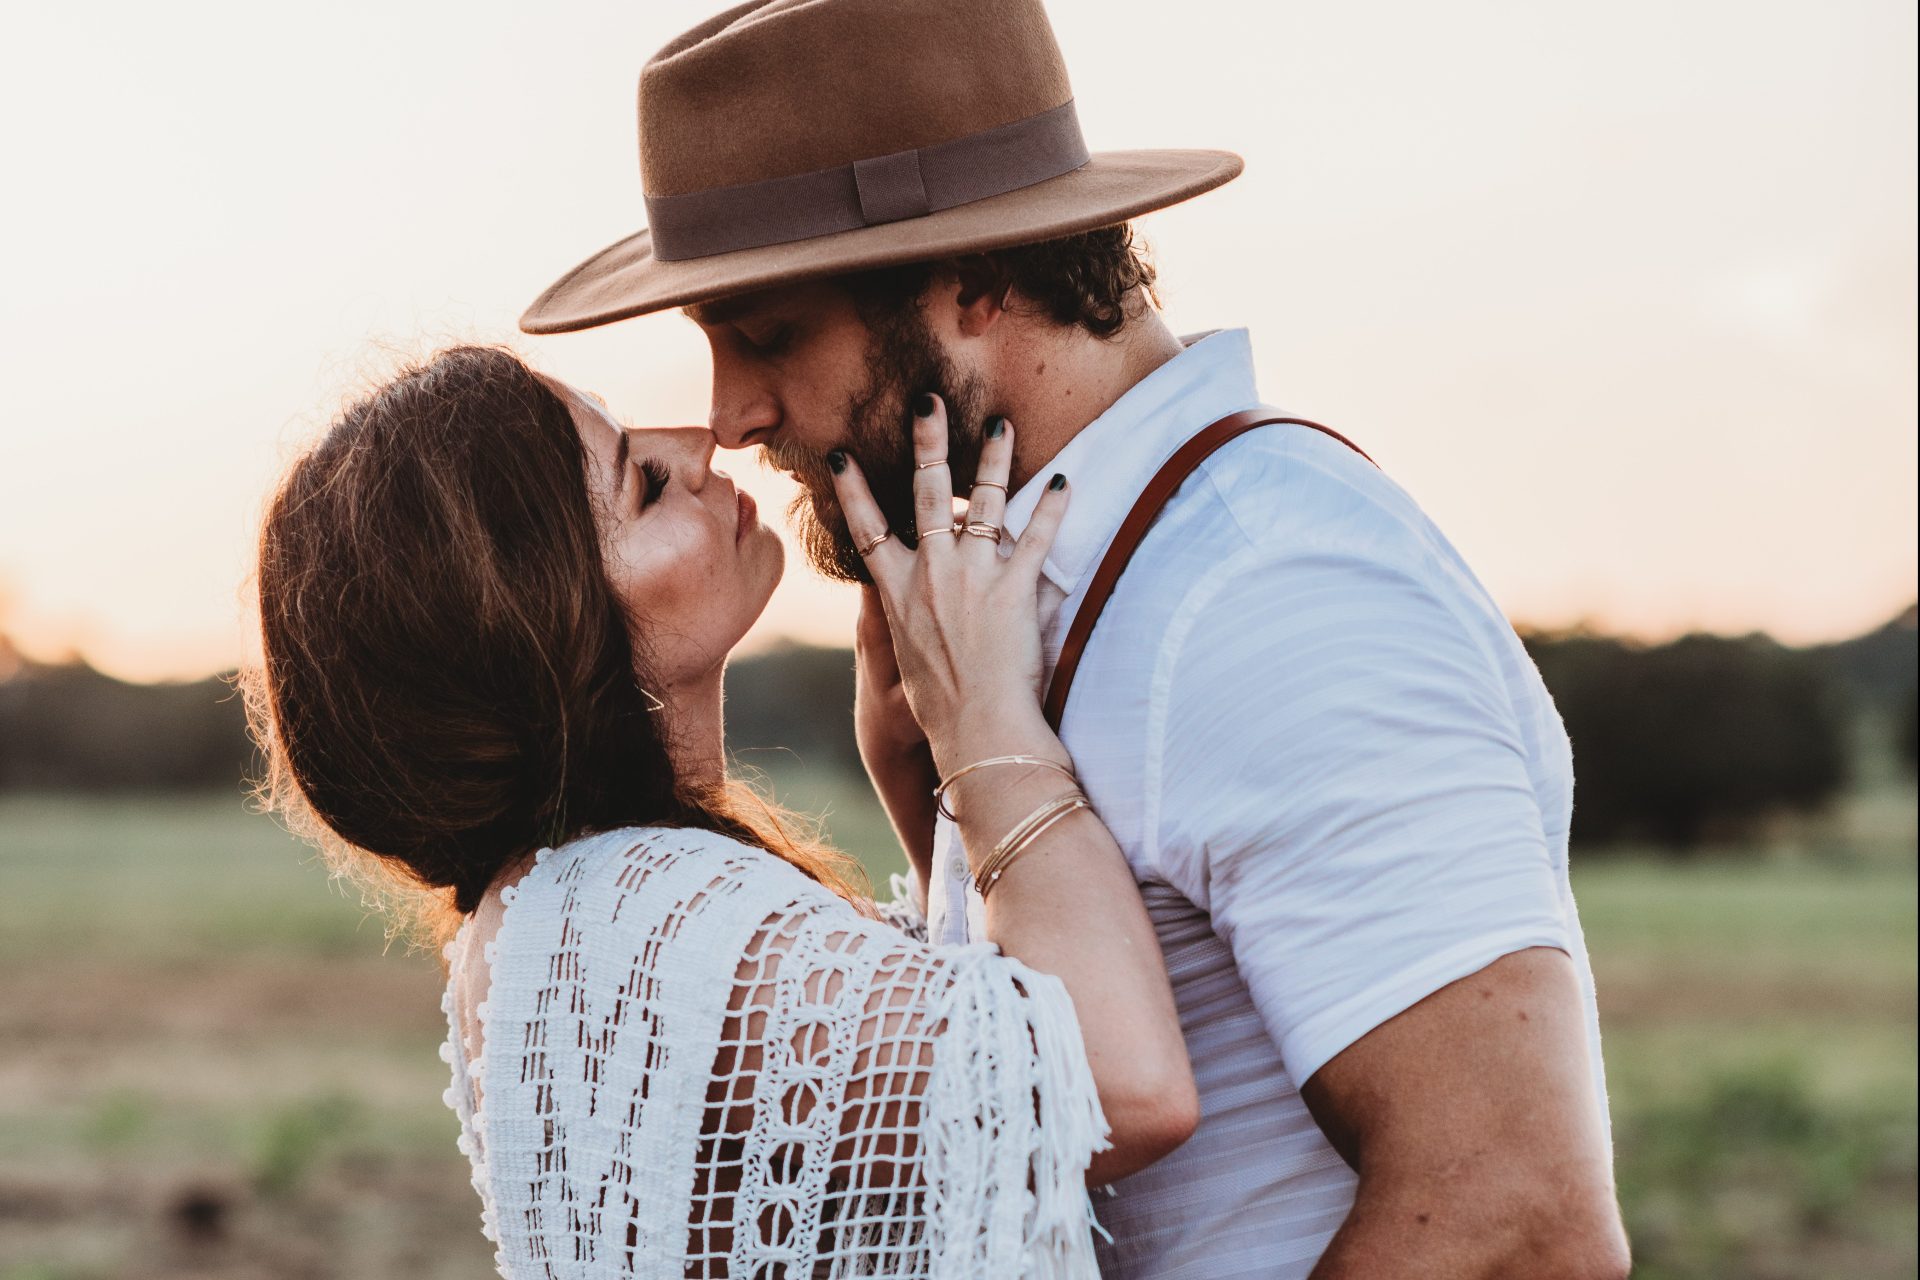 50 Signs You Have Found Your Forever Person And Are Stupidly, Unabashedly In Love